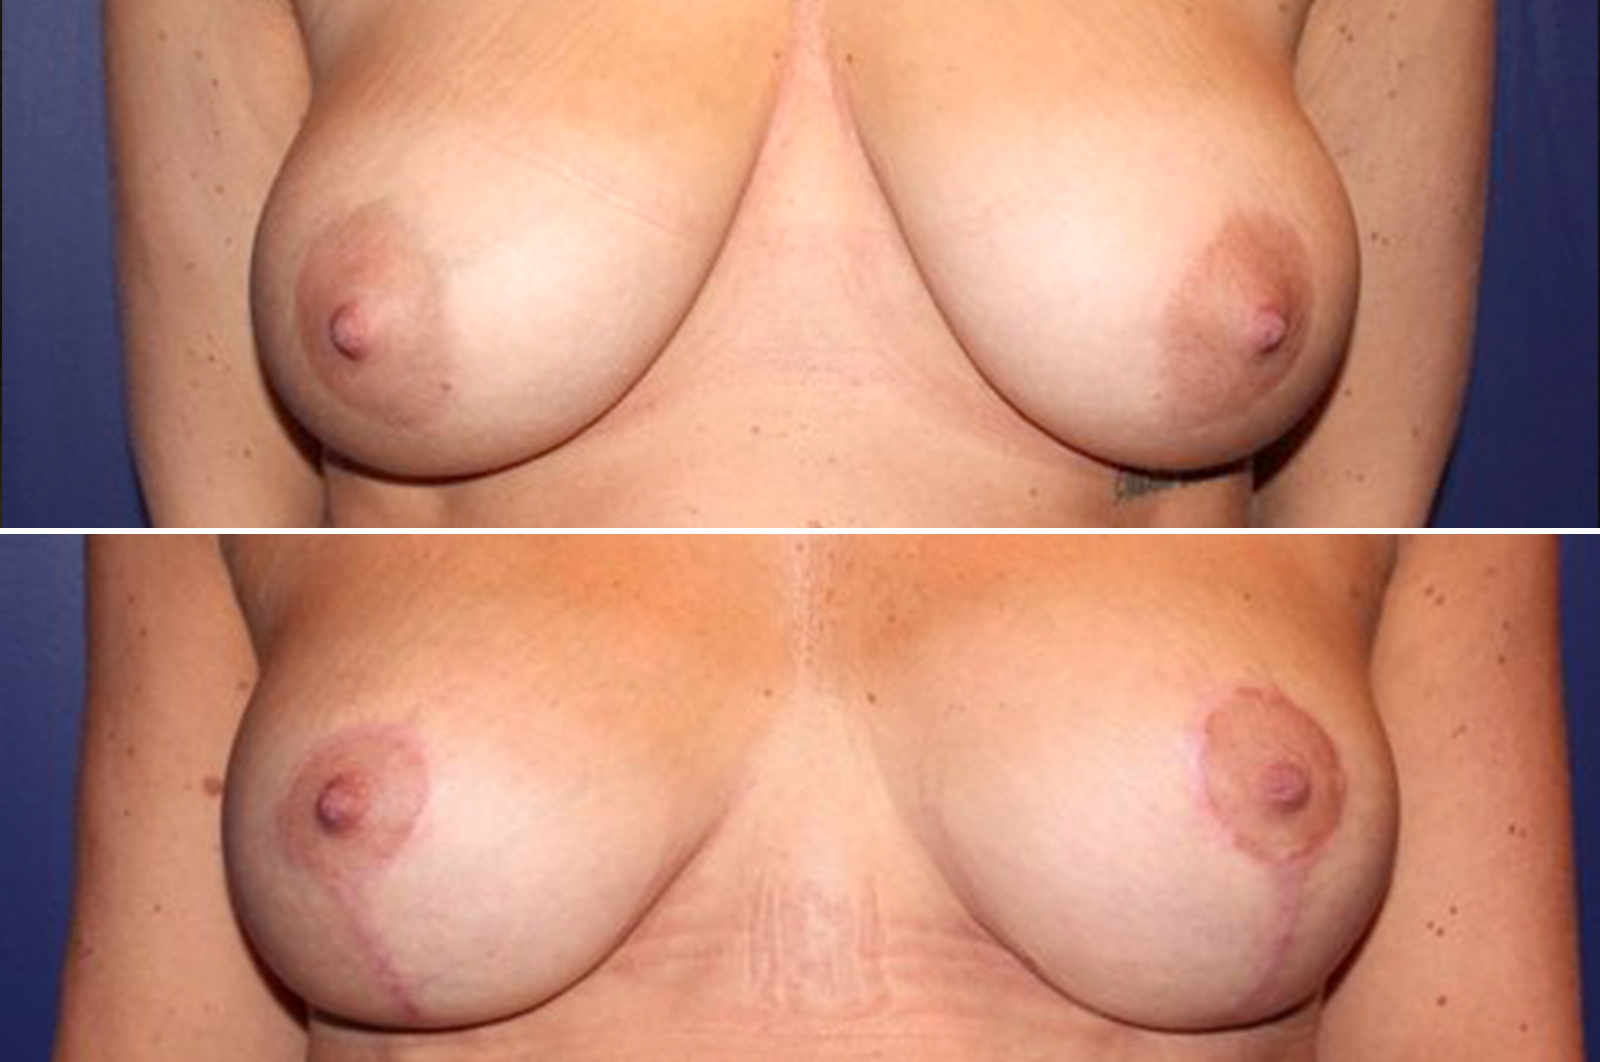 Body surgery breast reduction before and after surgery in antwerp